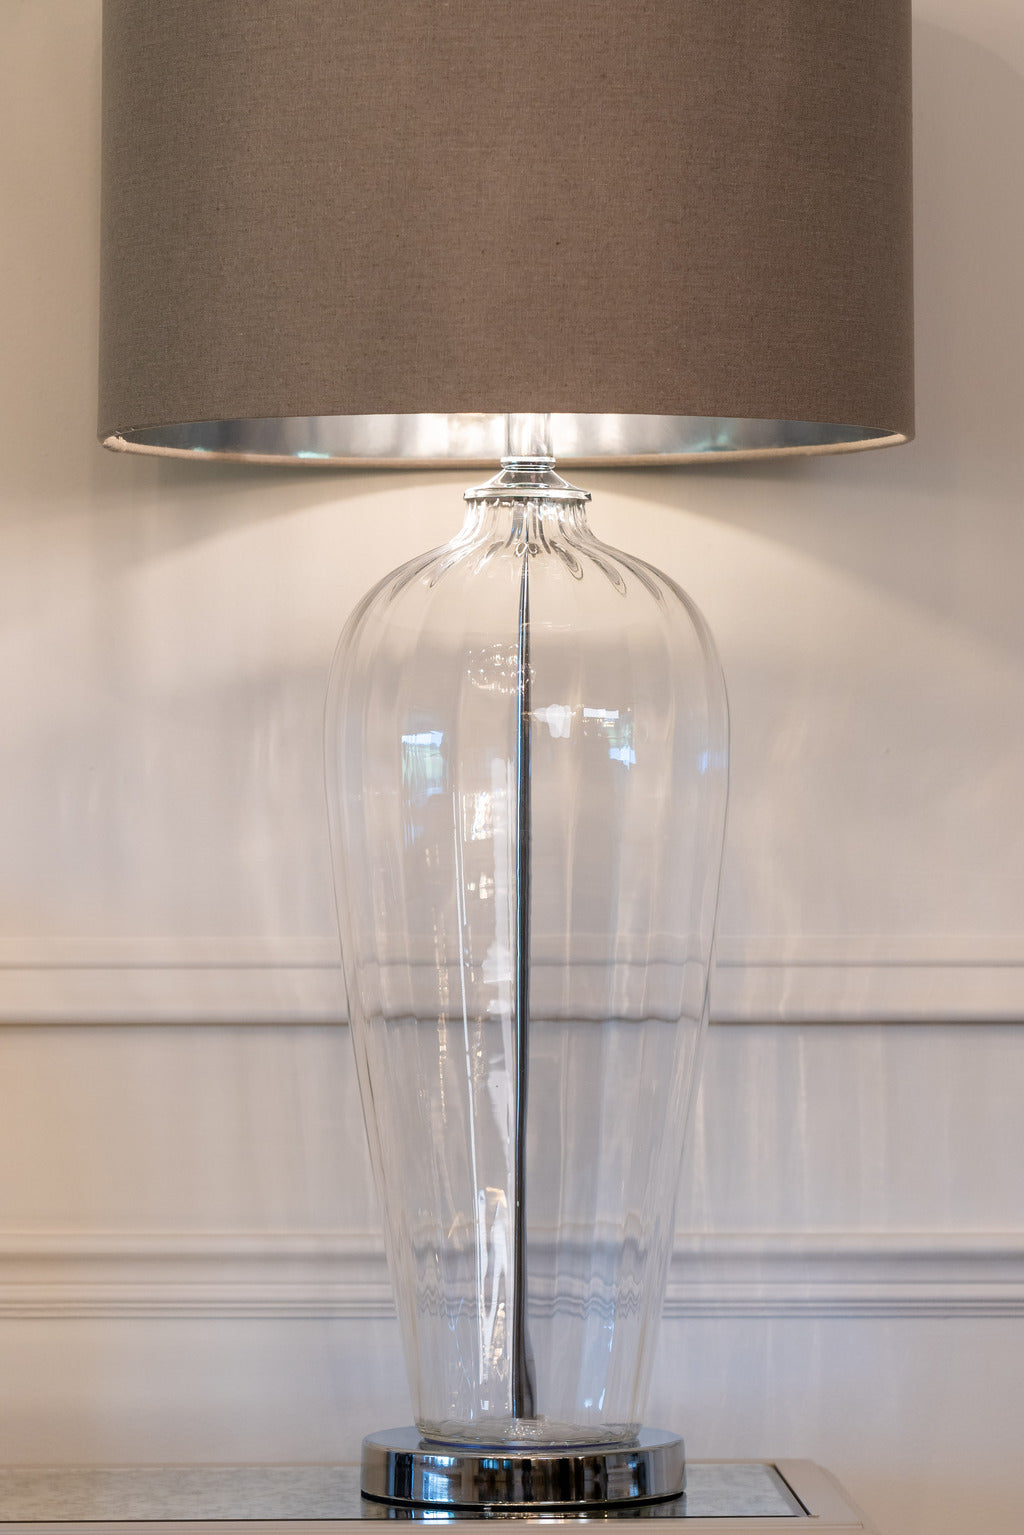 Glass Lamp, Dark lampshades, Silver and glass lamps, Large lamp, Statement decor, Decor